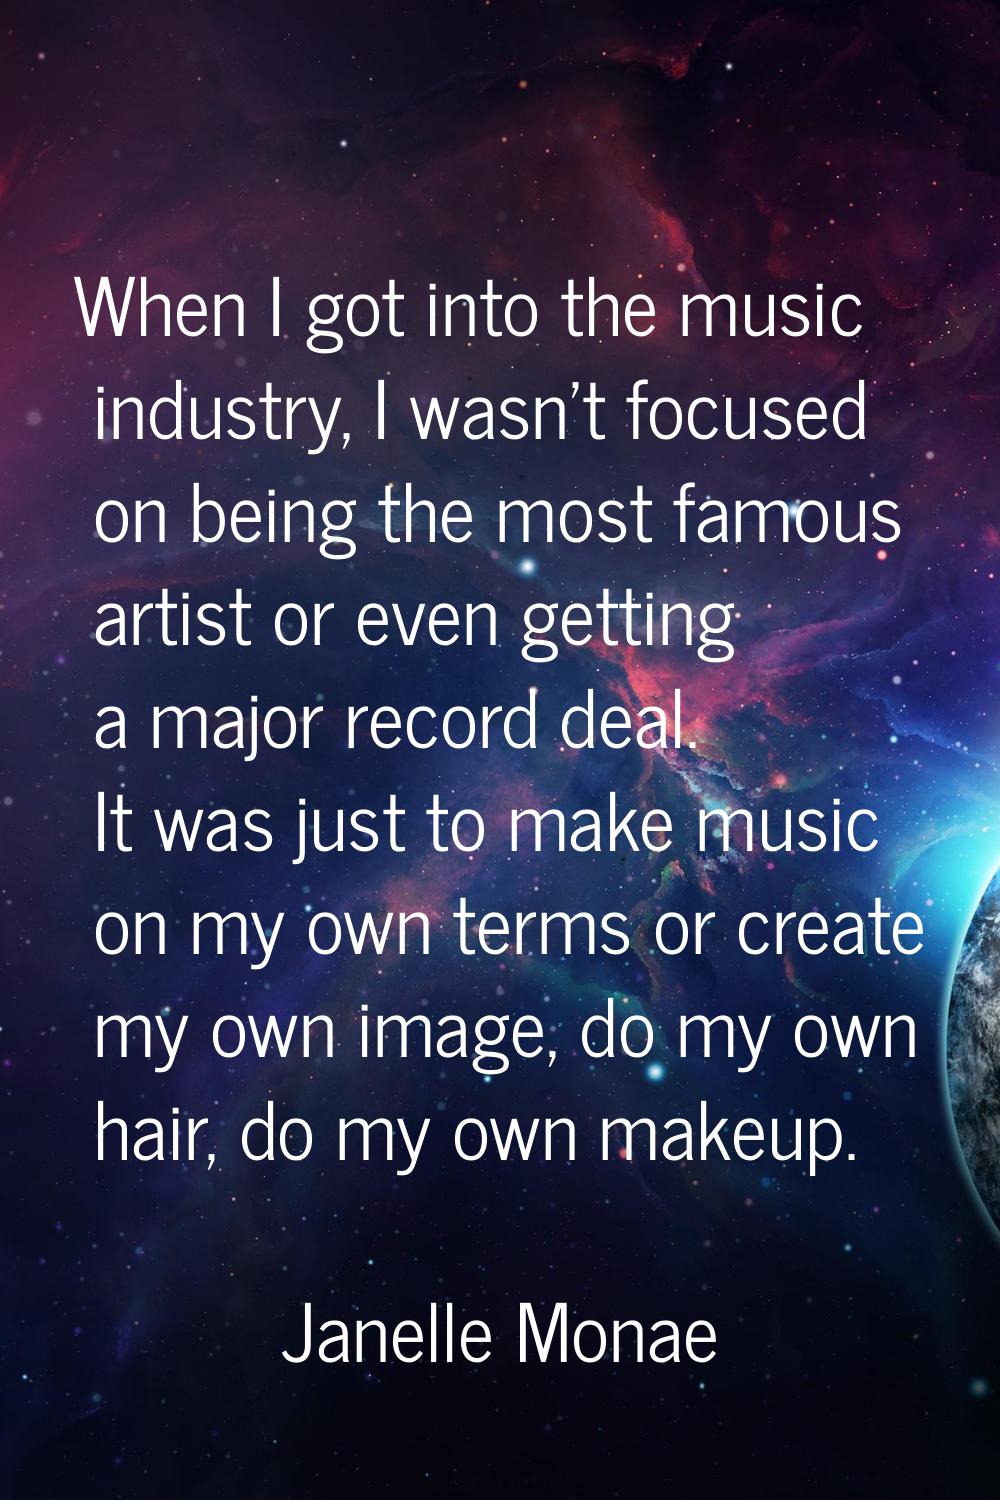 When I got into the music industry, I wasn't focused on being the most famous artist or even gettin